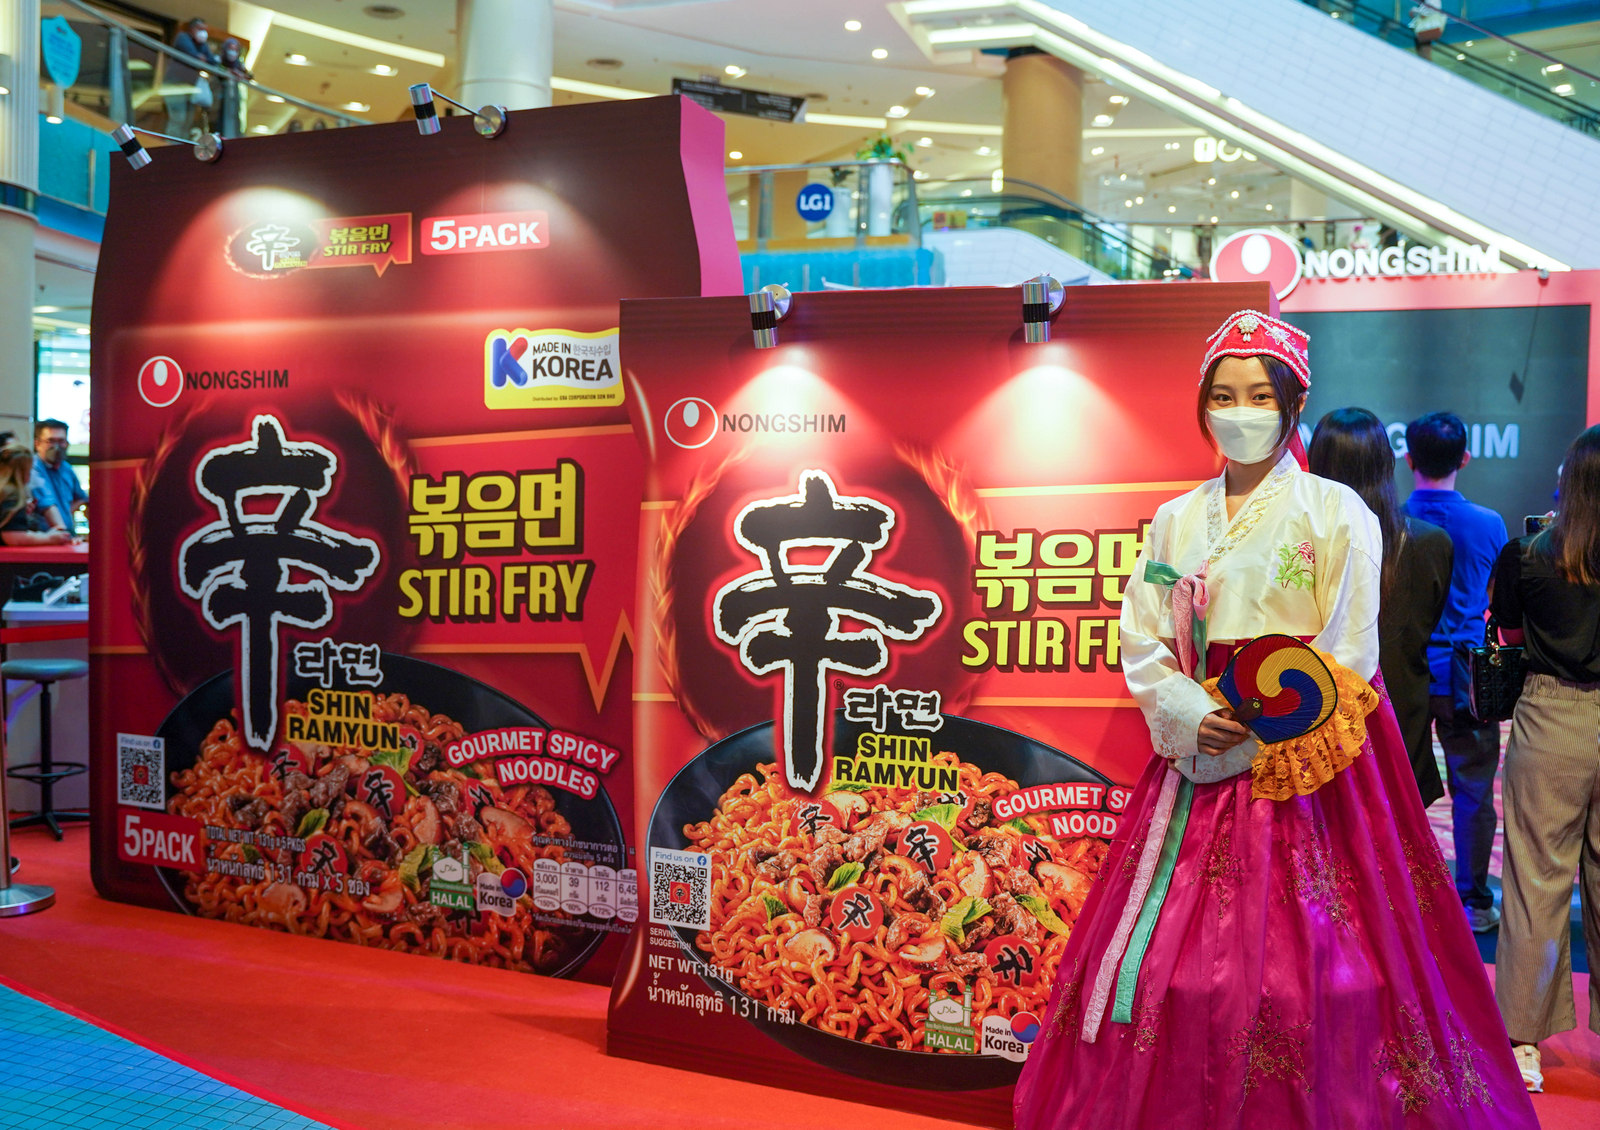 stir your senses this weekend at the launch of nongshim's shin stir fry ramyun in sunway pyramid